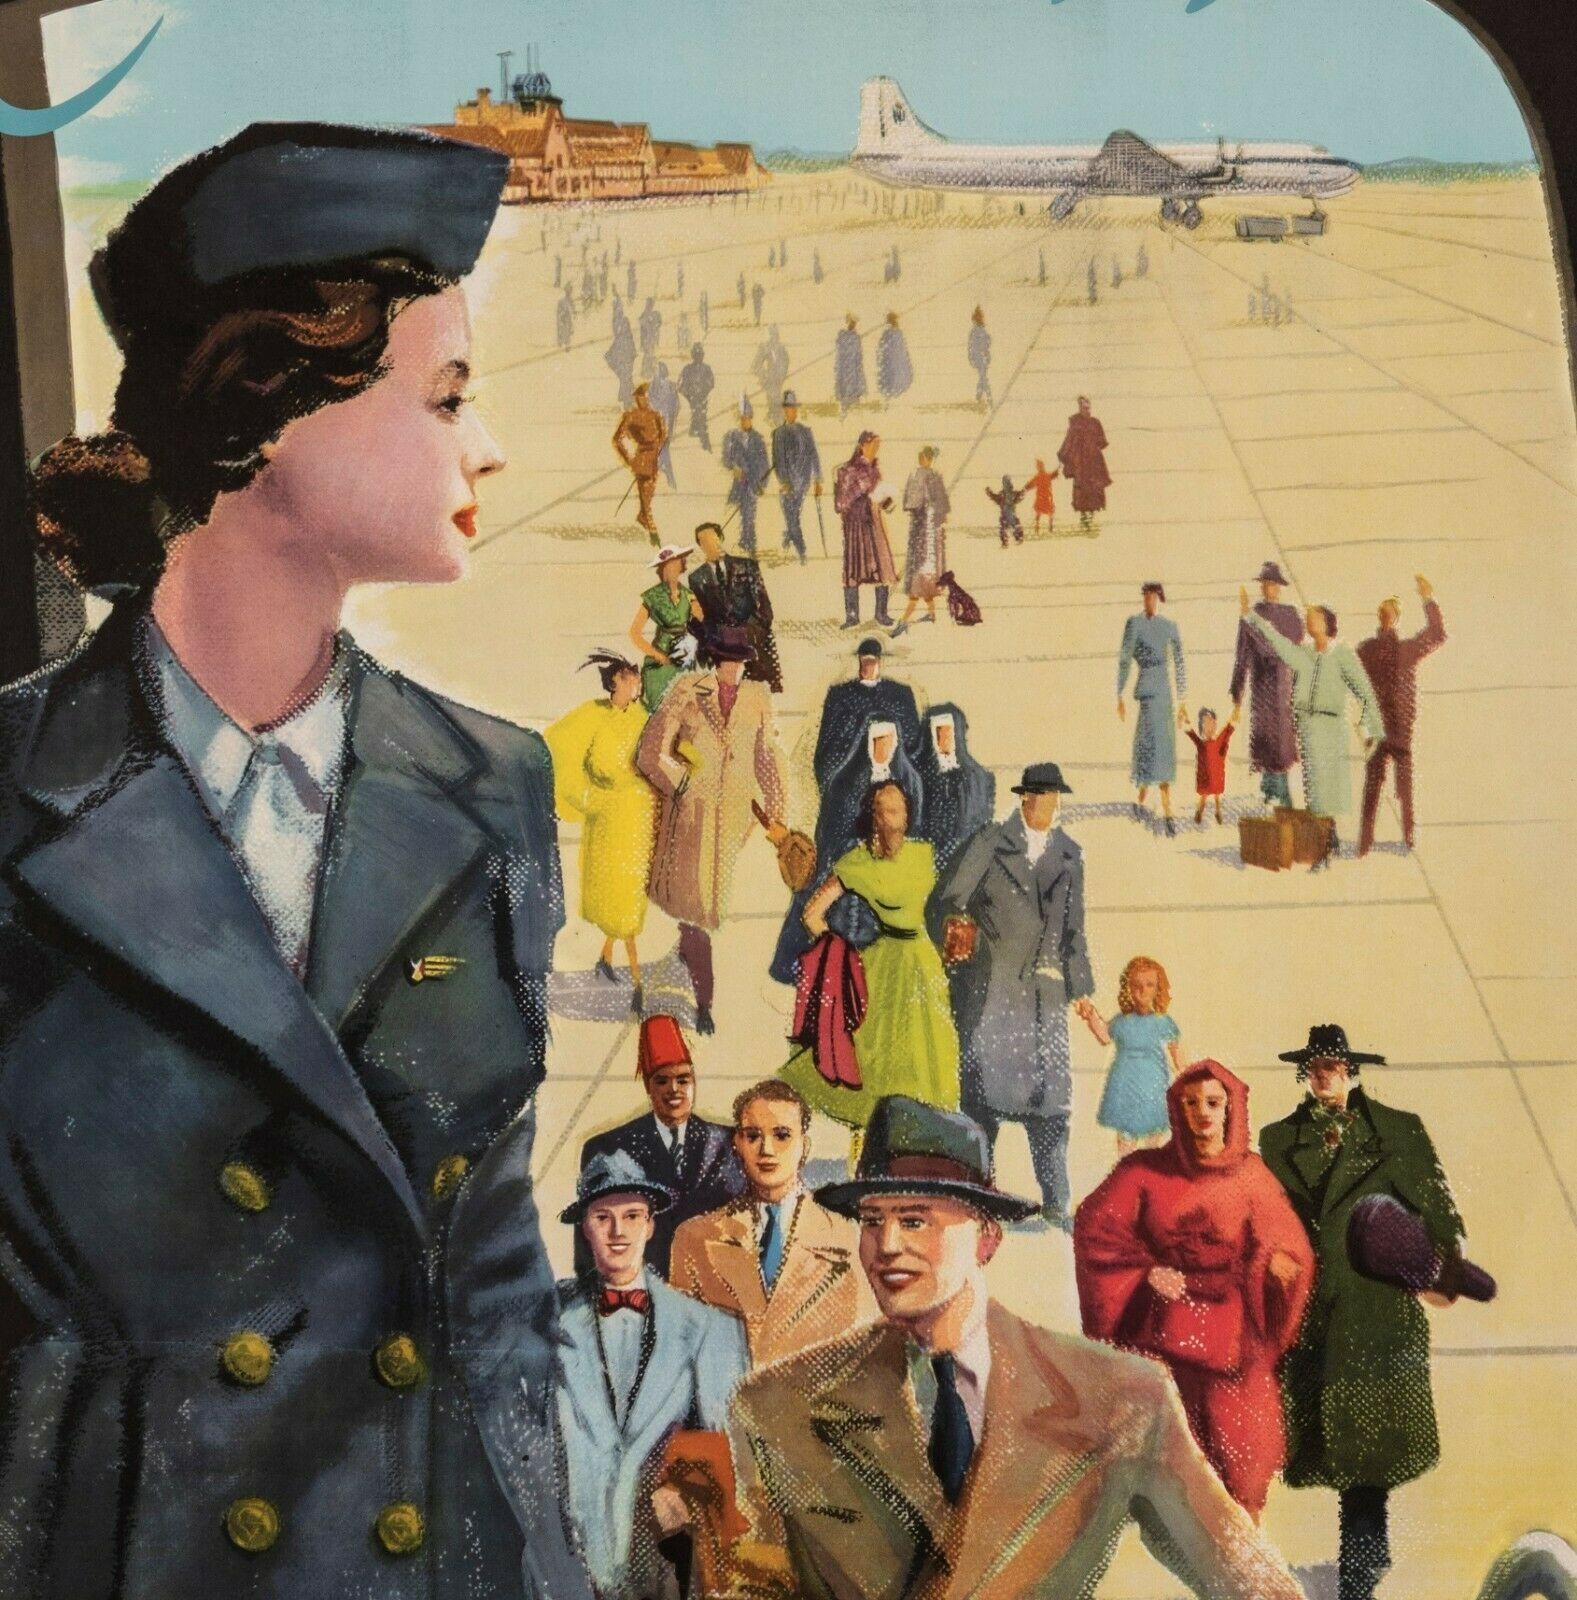 Original Aviation Poster-Travel the World-Sabena-Belgium-Airport, c.1950

Poster for the promotion of tourism by the airline SABENA.
Nuns, families, businessmen, soldiers, a musician with his violin / guitar are on the tarmac at Brussels airport in